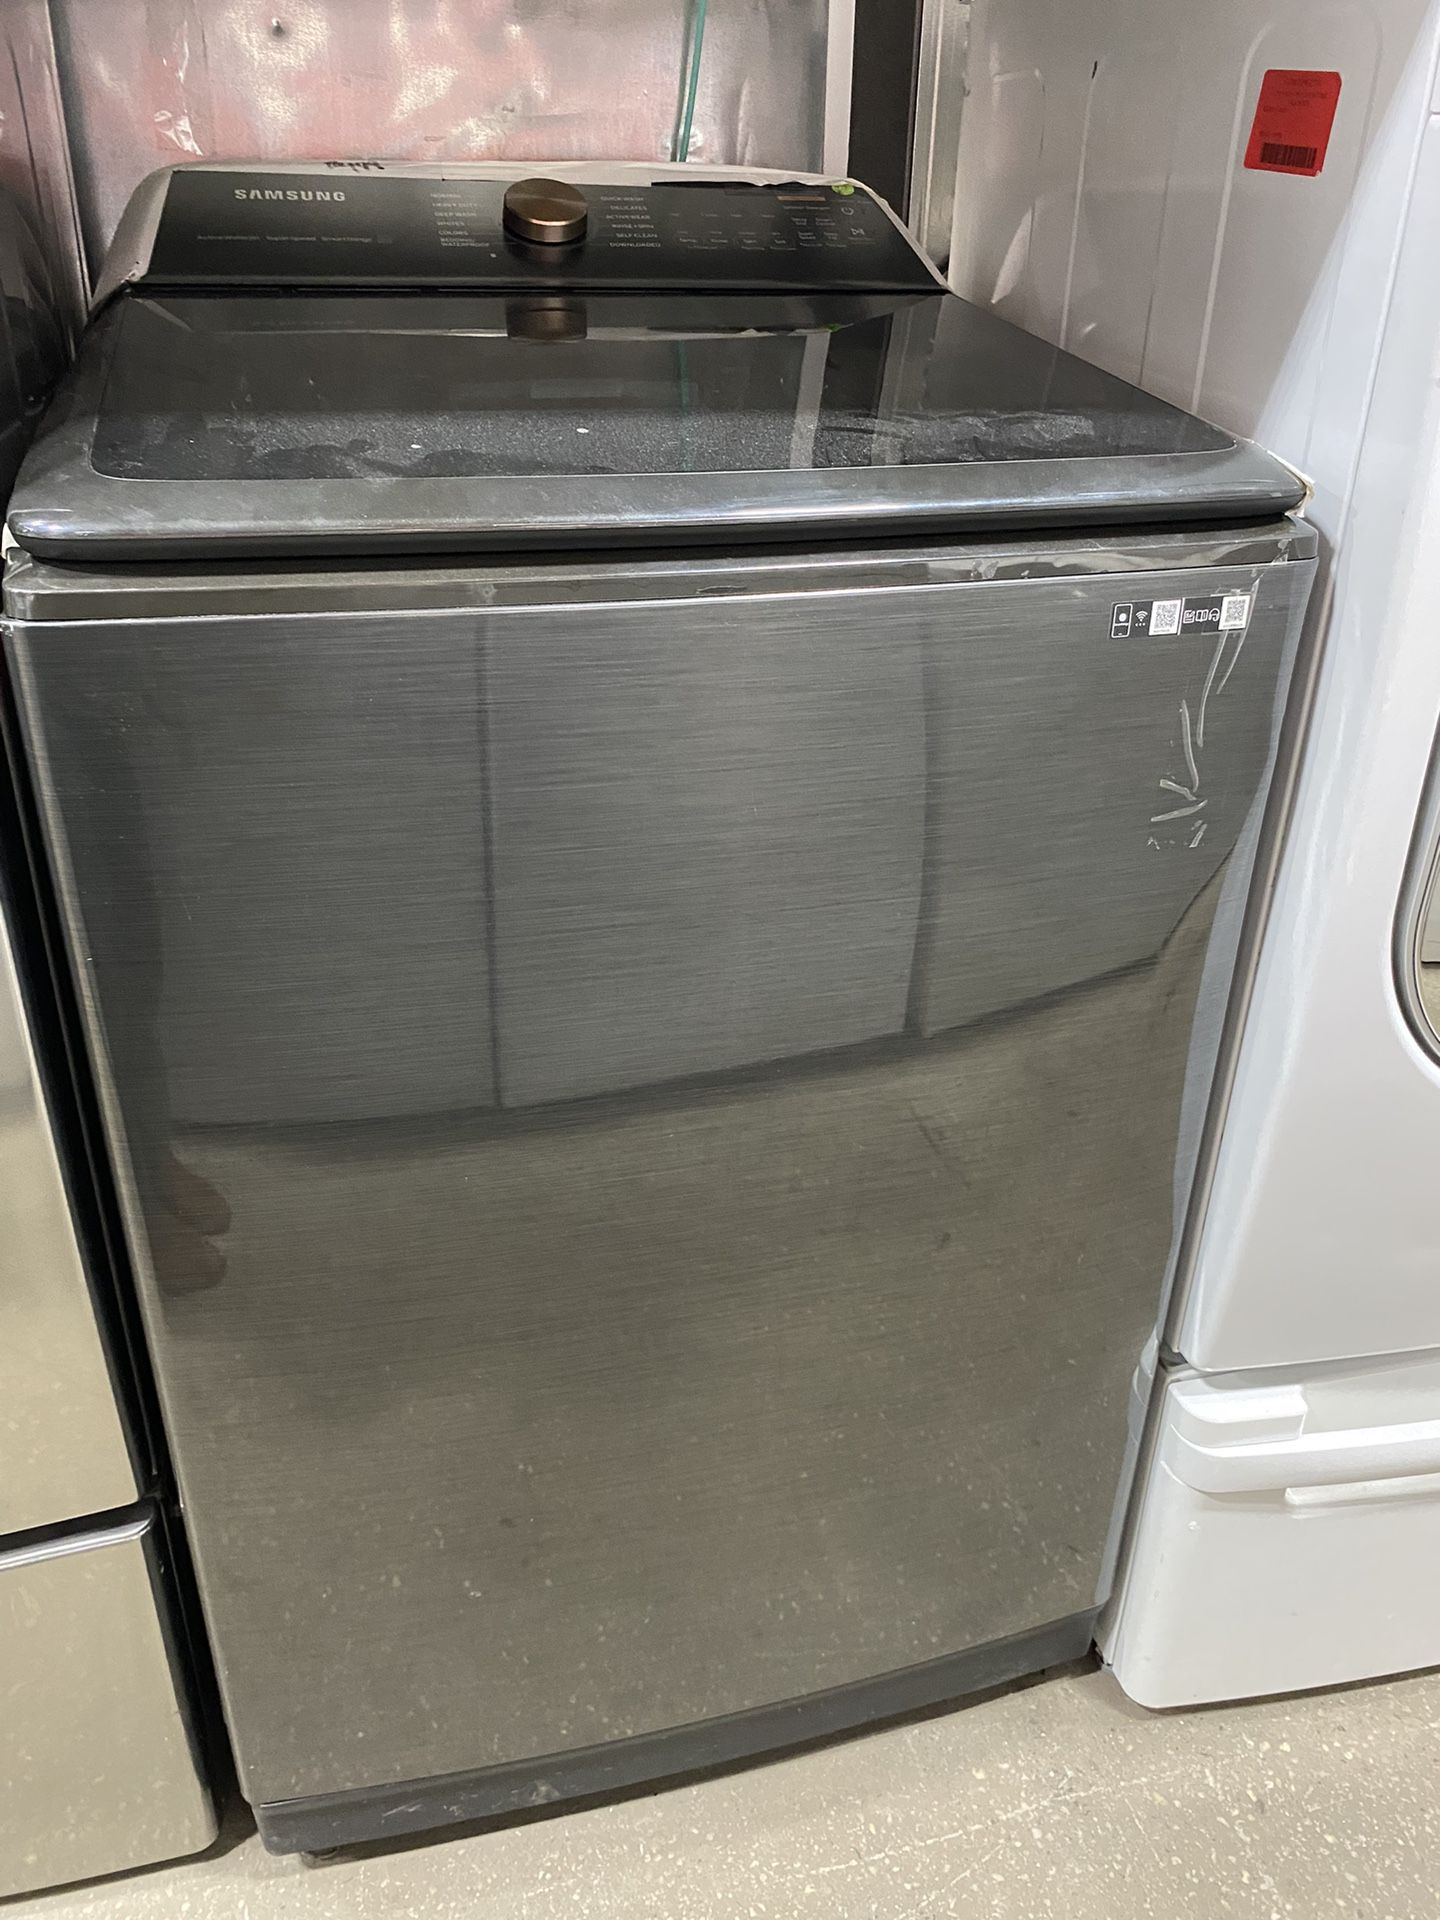 X-Large Top Load Washer